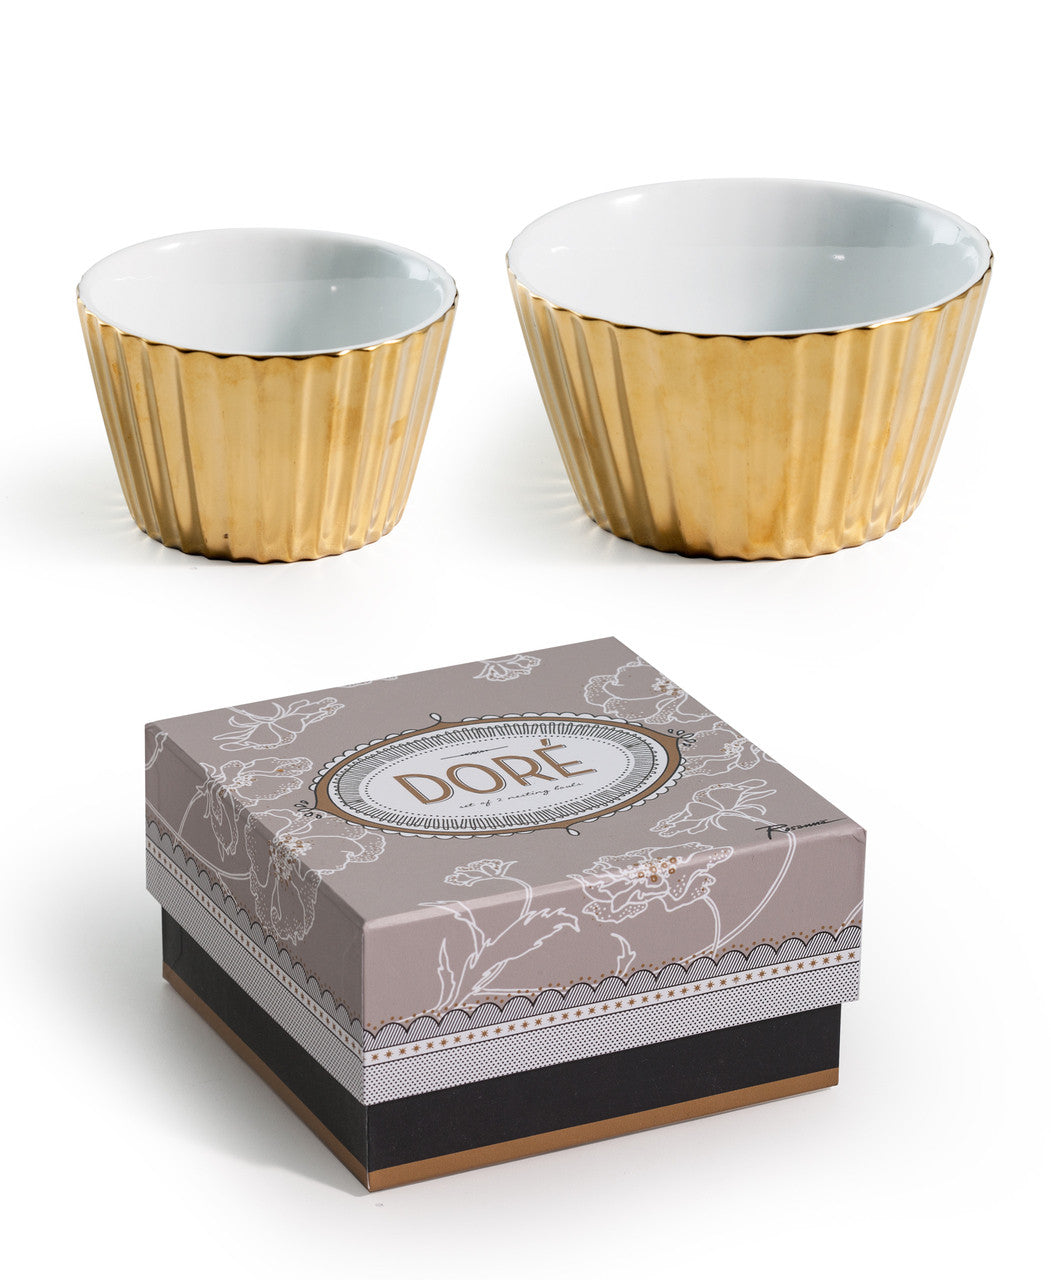 Dore' Nesting Scallop Bowls Set of 2 - RSVP Style